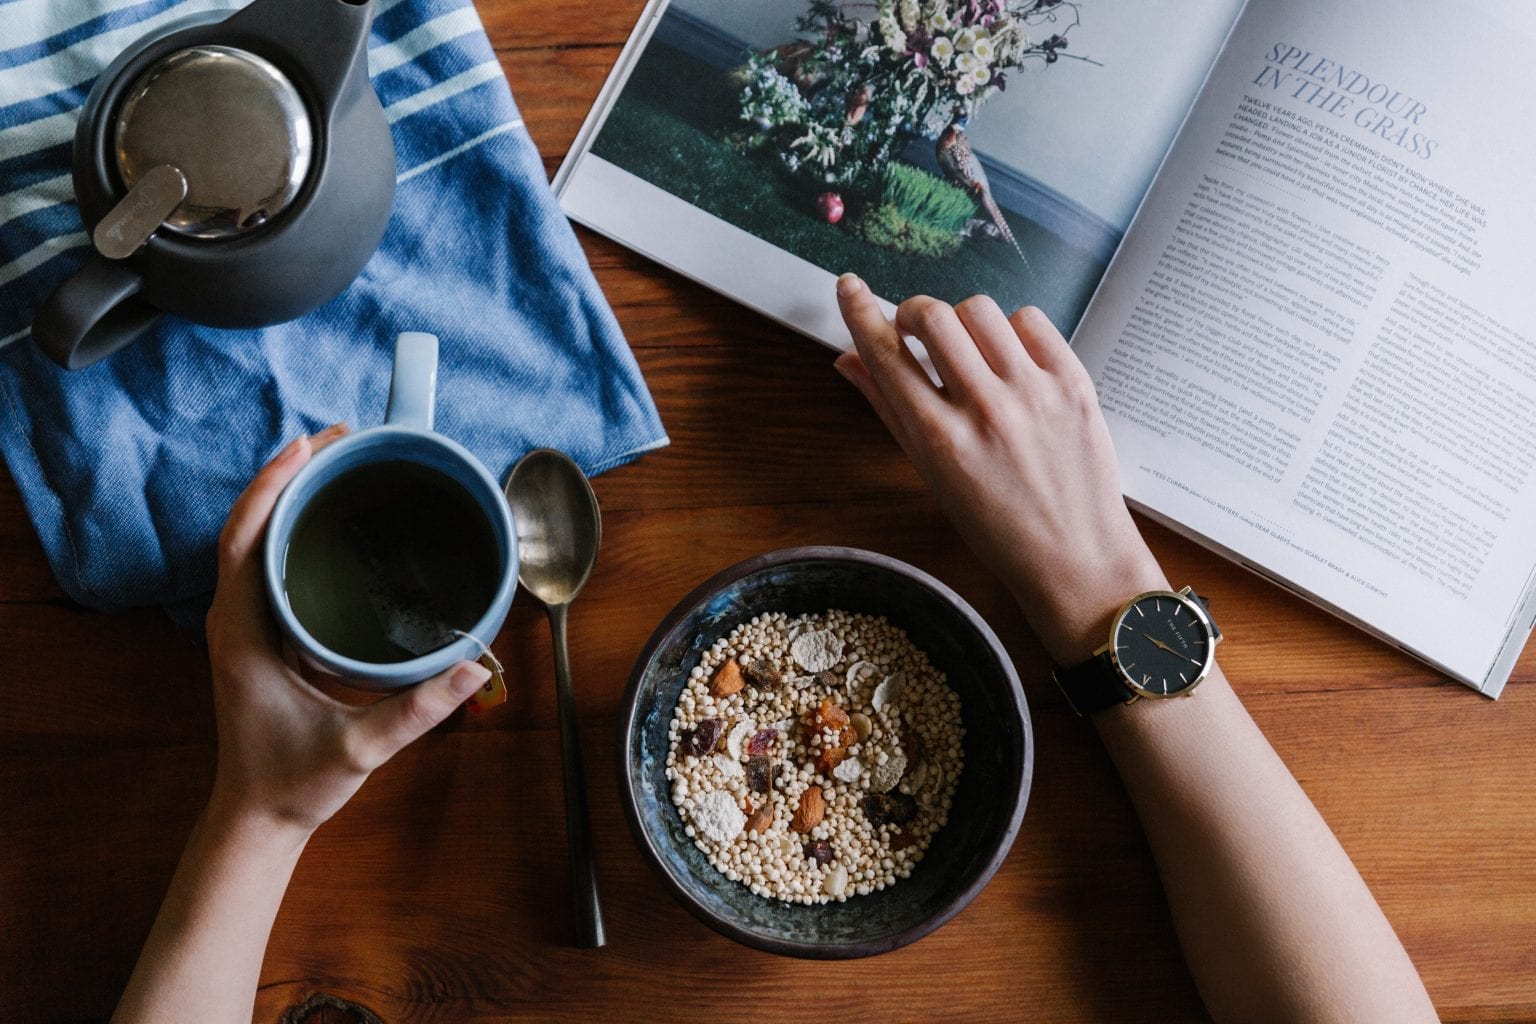 Photo of person reading a magazine with a cup of tea and bowl of cereal